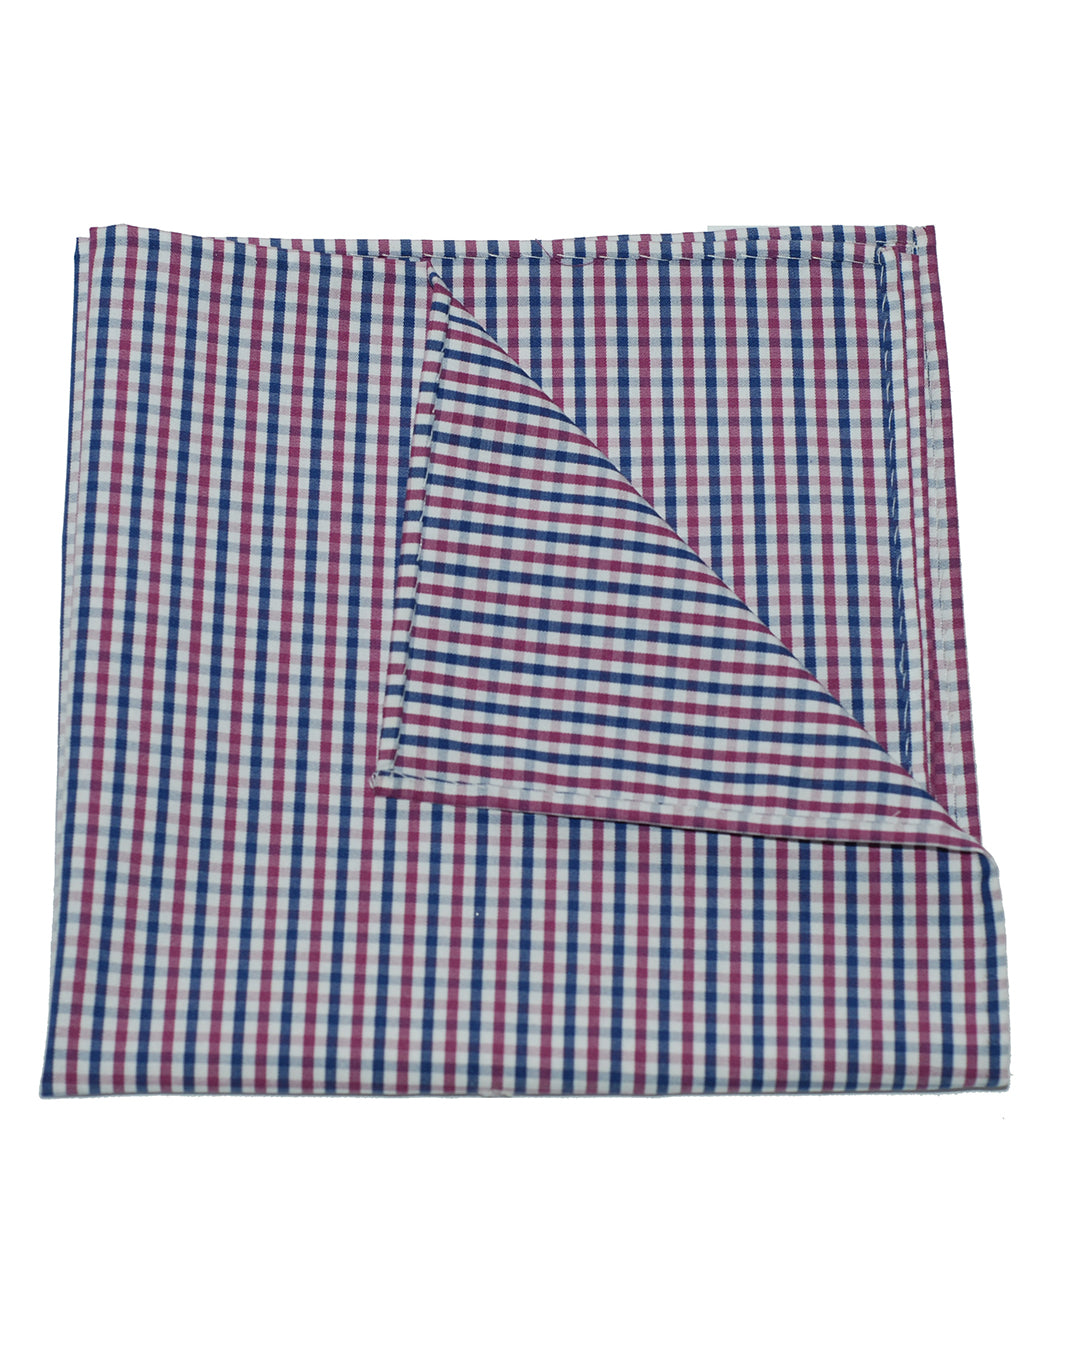 Pocket Square - Mulberry Gingham